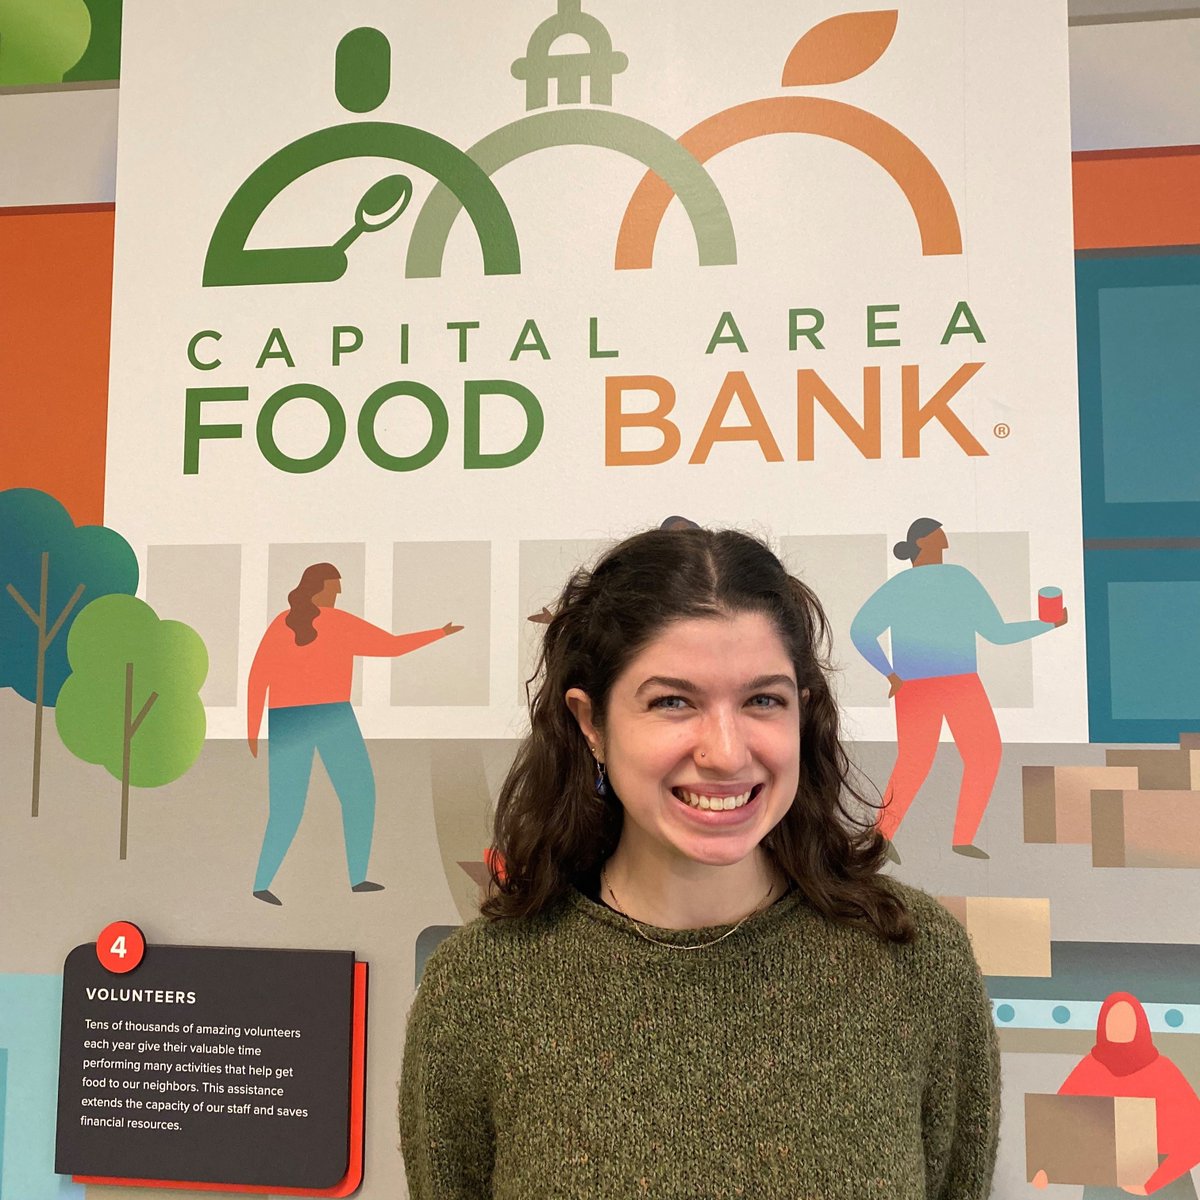 Meet one of the first faces our volunteers see at CAFB: Keaton Bergeron, volunteer engagement specialist! Keaton greets volunteers & walks them through their tasks for each shift. “Every single volunteer is part of the 61 million meals we provided last year,” Keaton says.